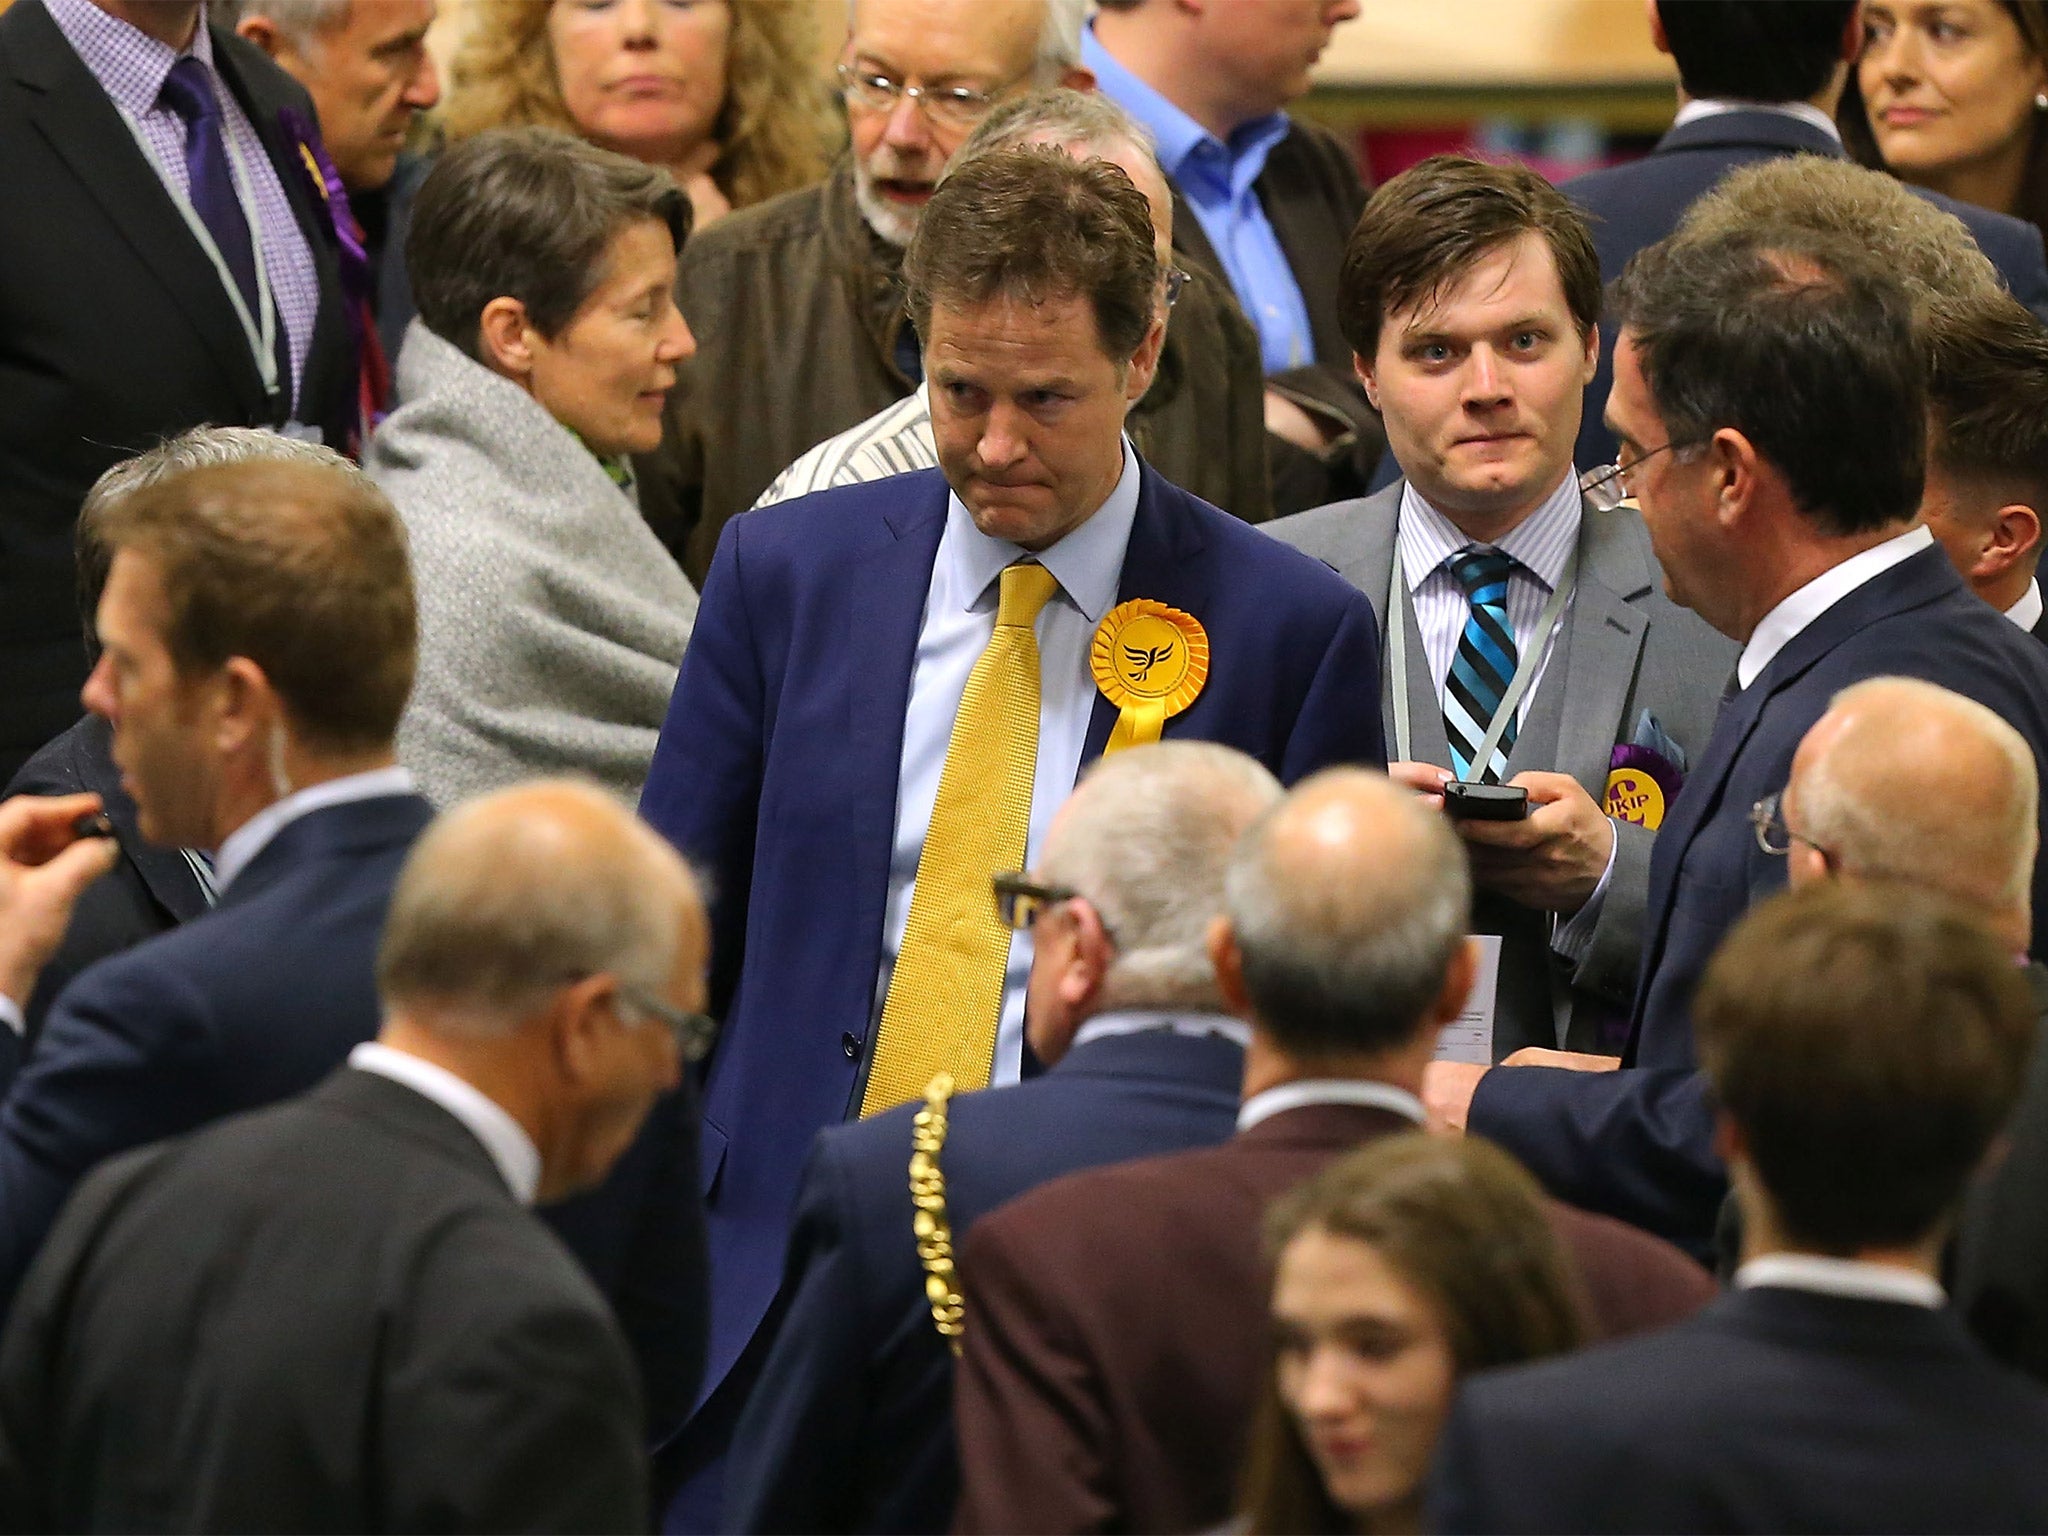 Down and out: Liberal Democrats leader Nick Clegg looks dejected the day after 2015's election annihilation (AP)